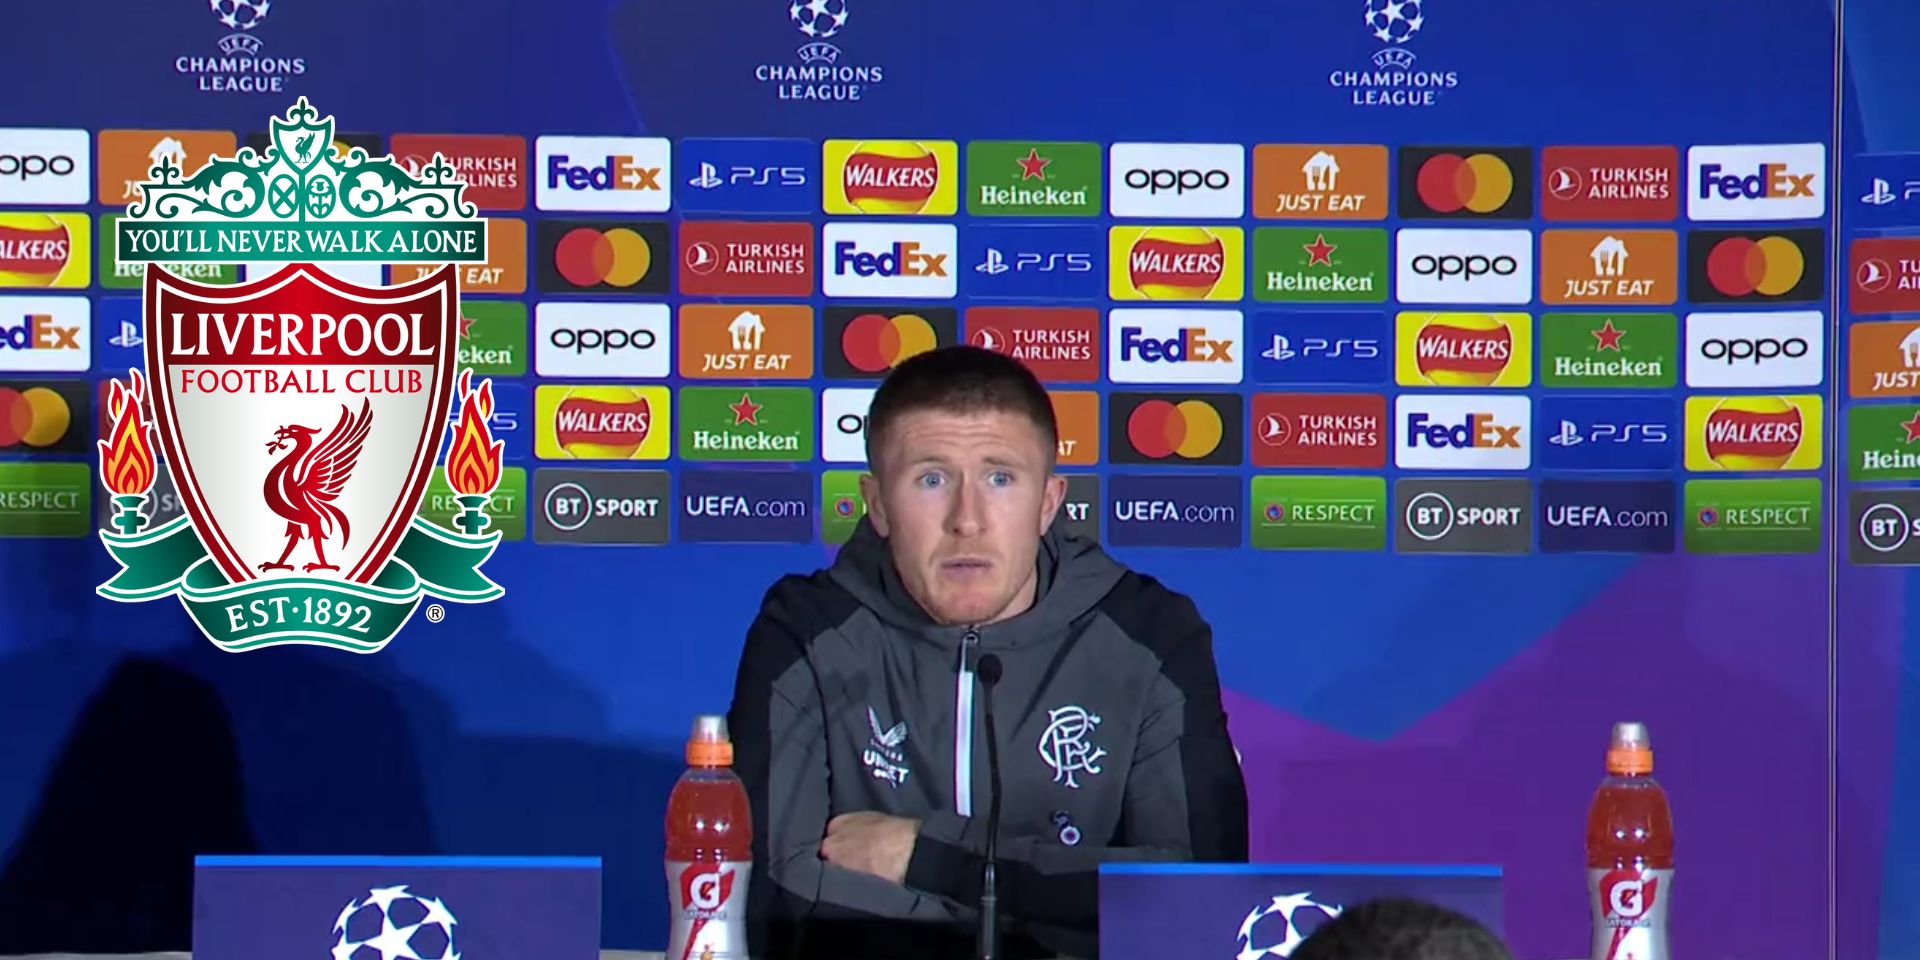 (Video) “It’s still Liverpool” – John Lundstram rubbishes claims of a poor Liverpool side after ‘a couple of poor results’